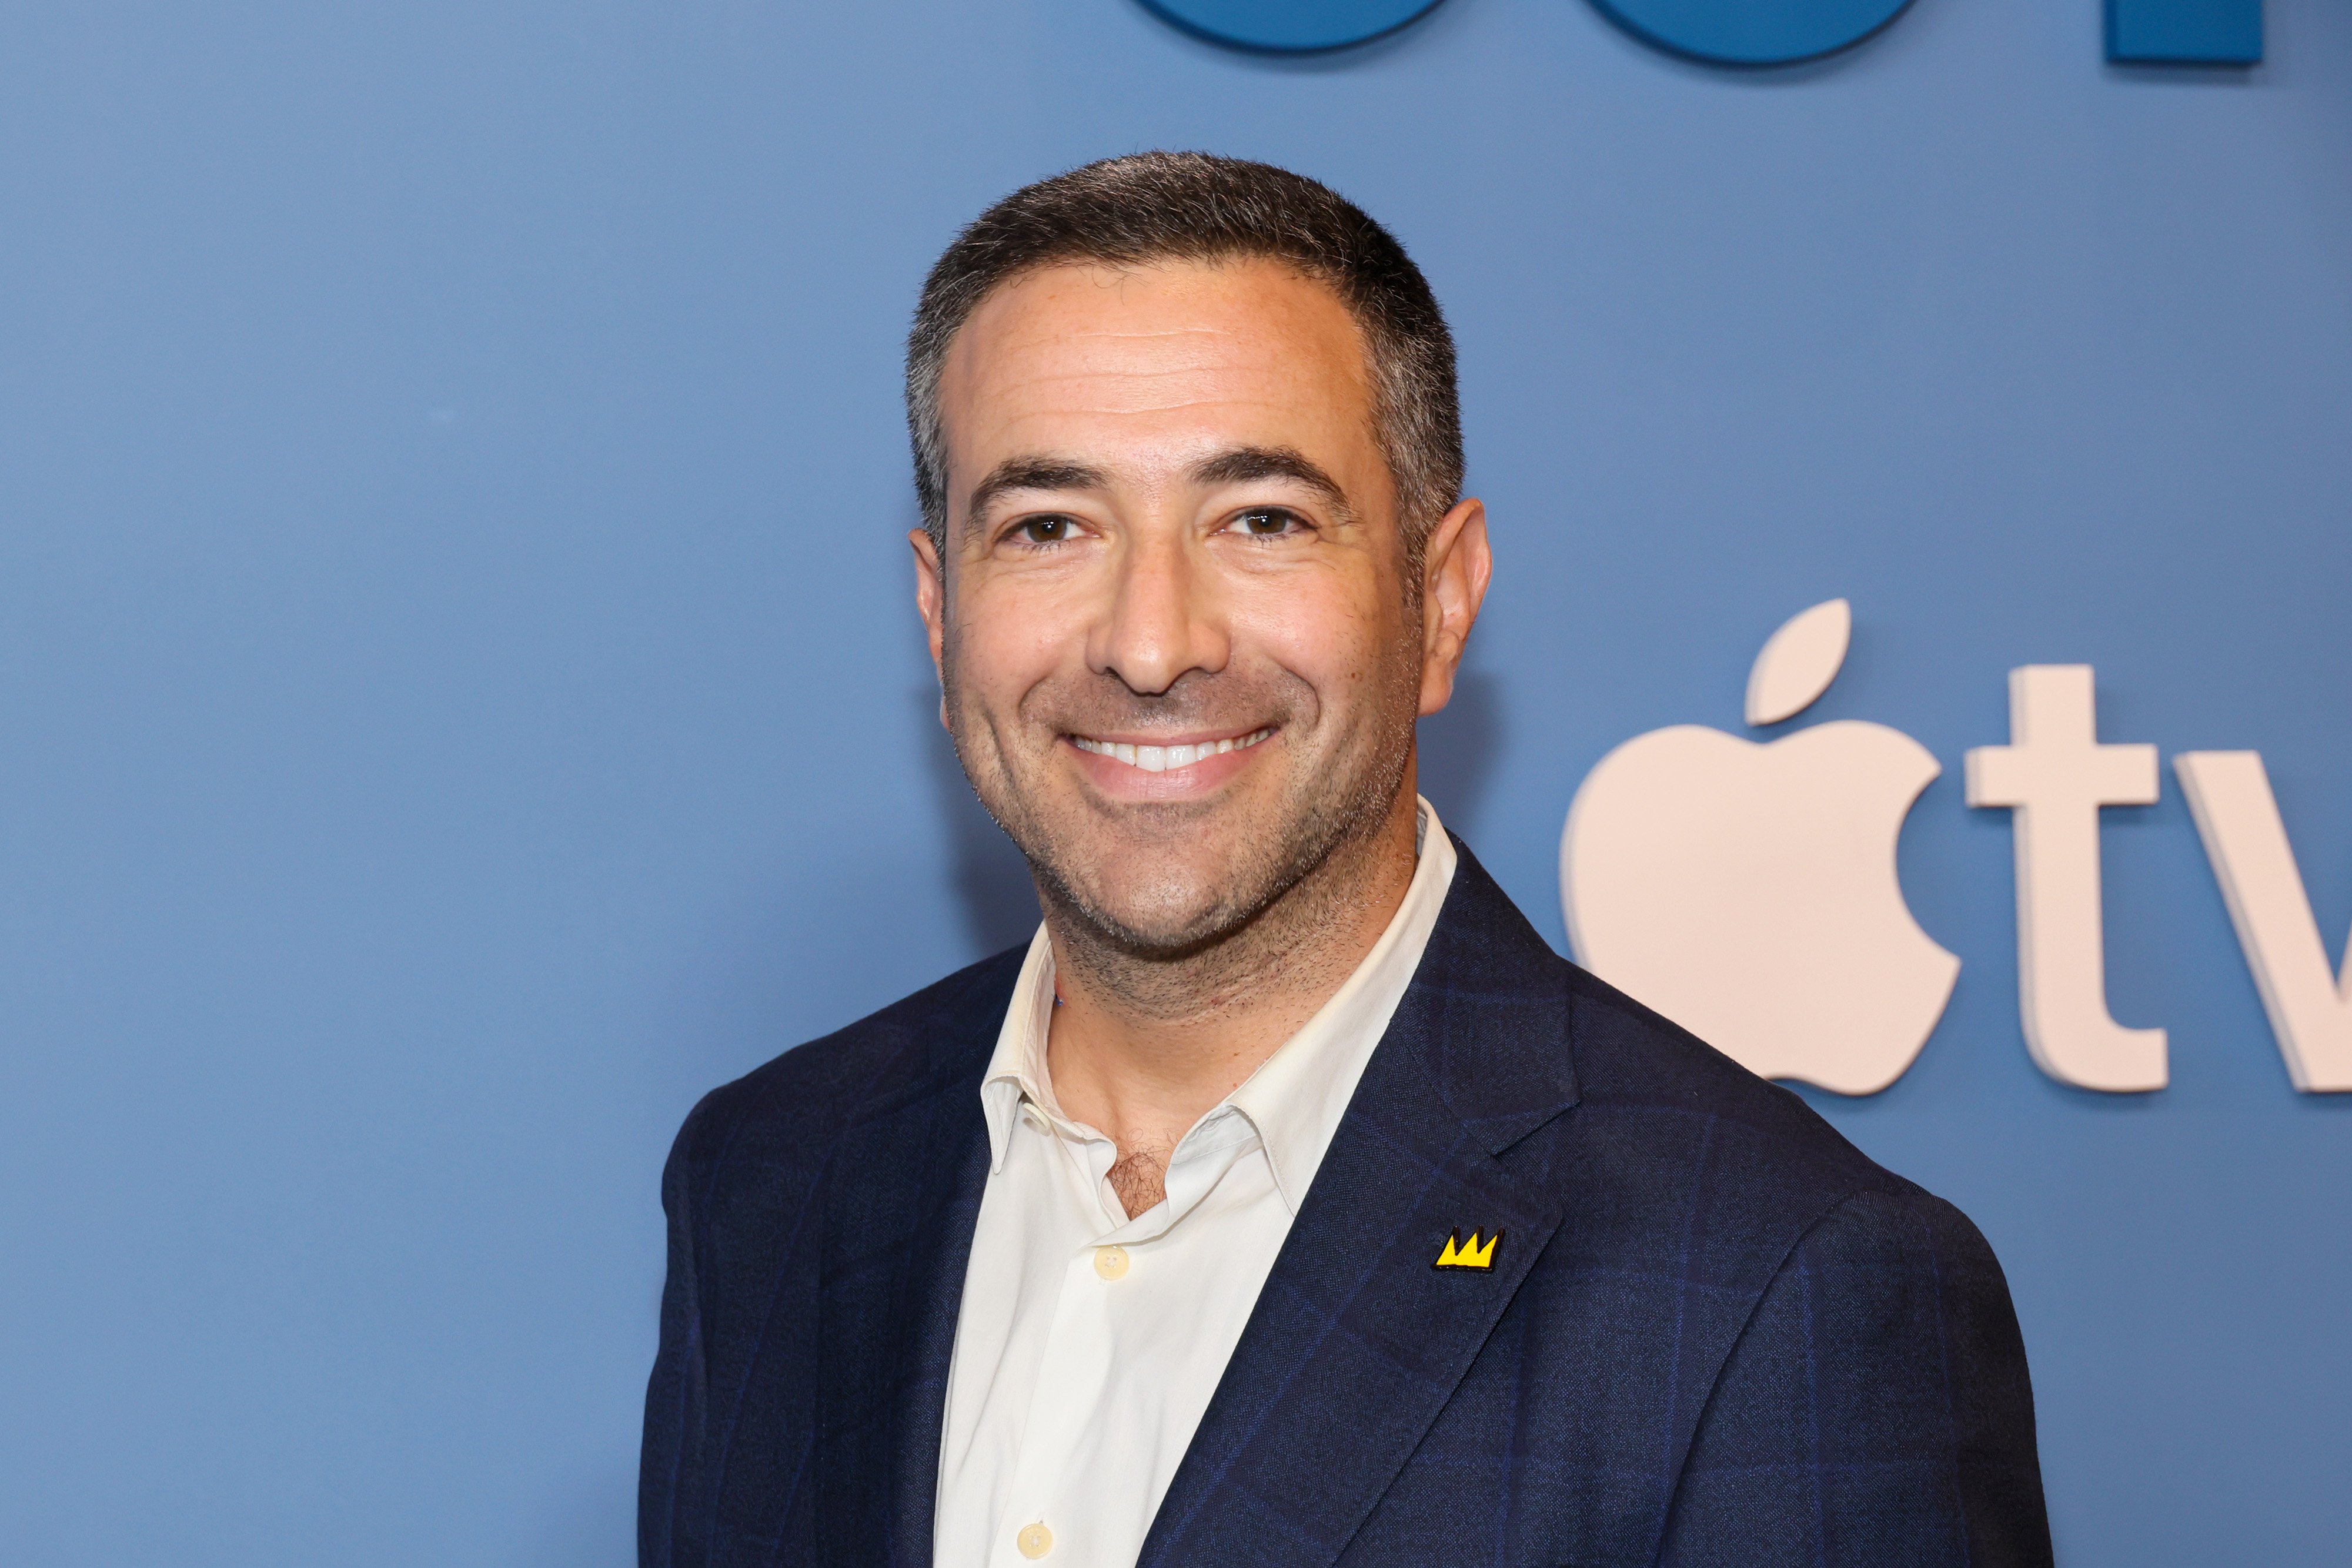 Ari Melber attends Apple TV+'s "Gutsy" premiere at Times Center Theatre on September 8, 2022, in New York City. | Source: Getty Images